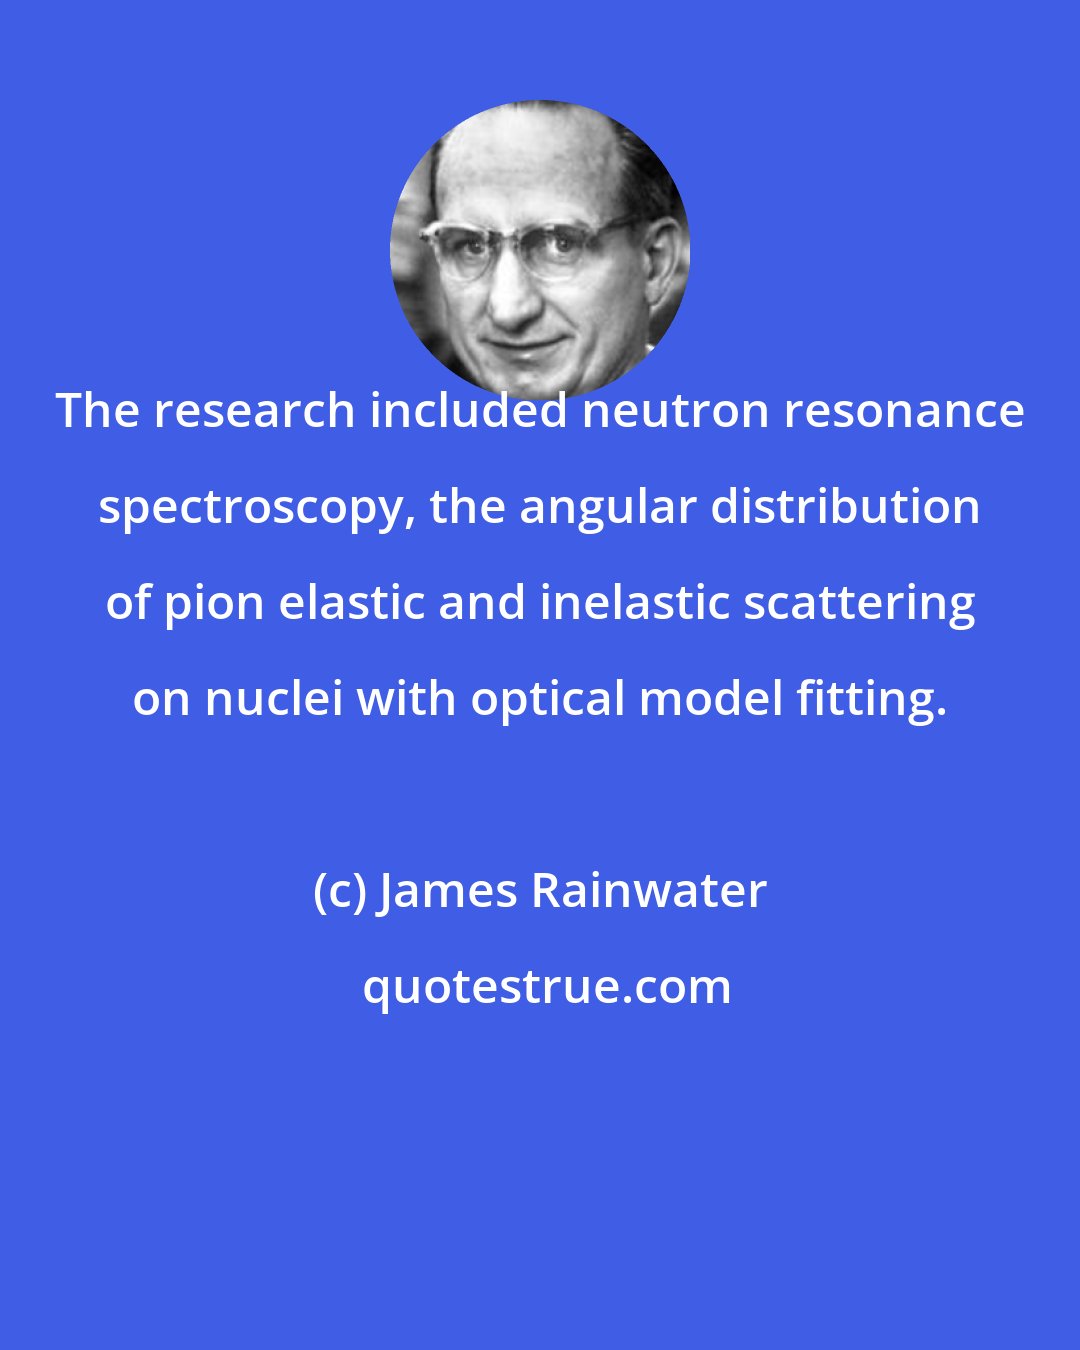 James Rainwater: The research included neutron resonance spectroscopy, the angular distribution of pion elastic and inelastic scattering on nuclei with optical model fitting.